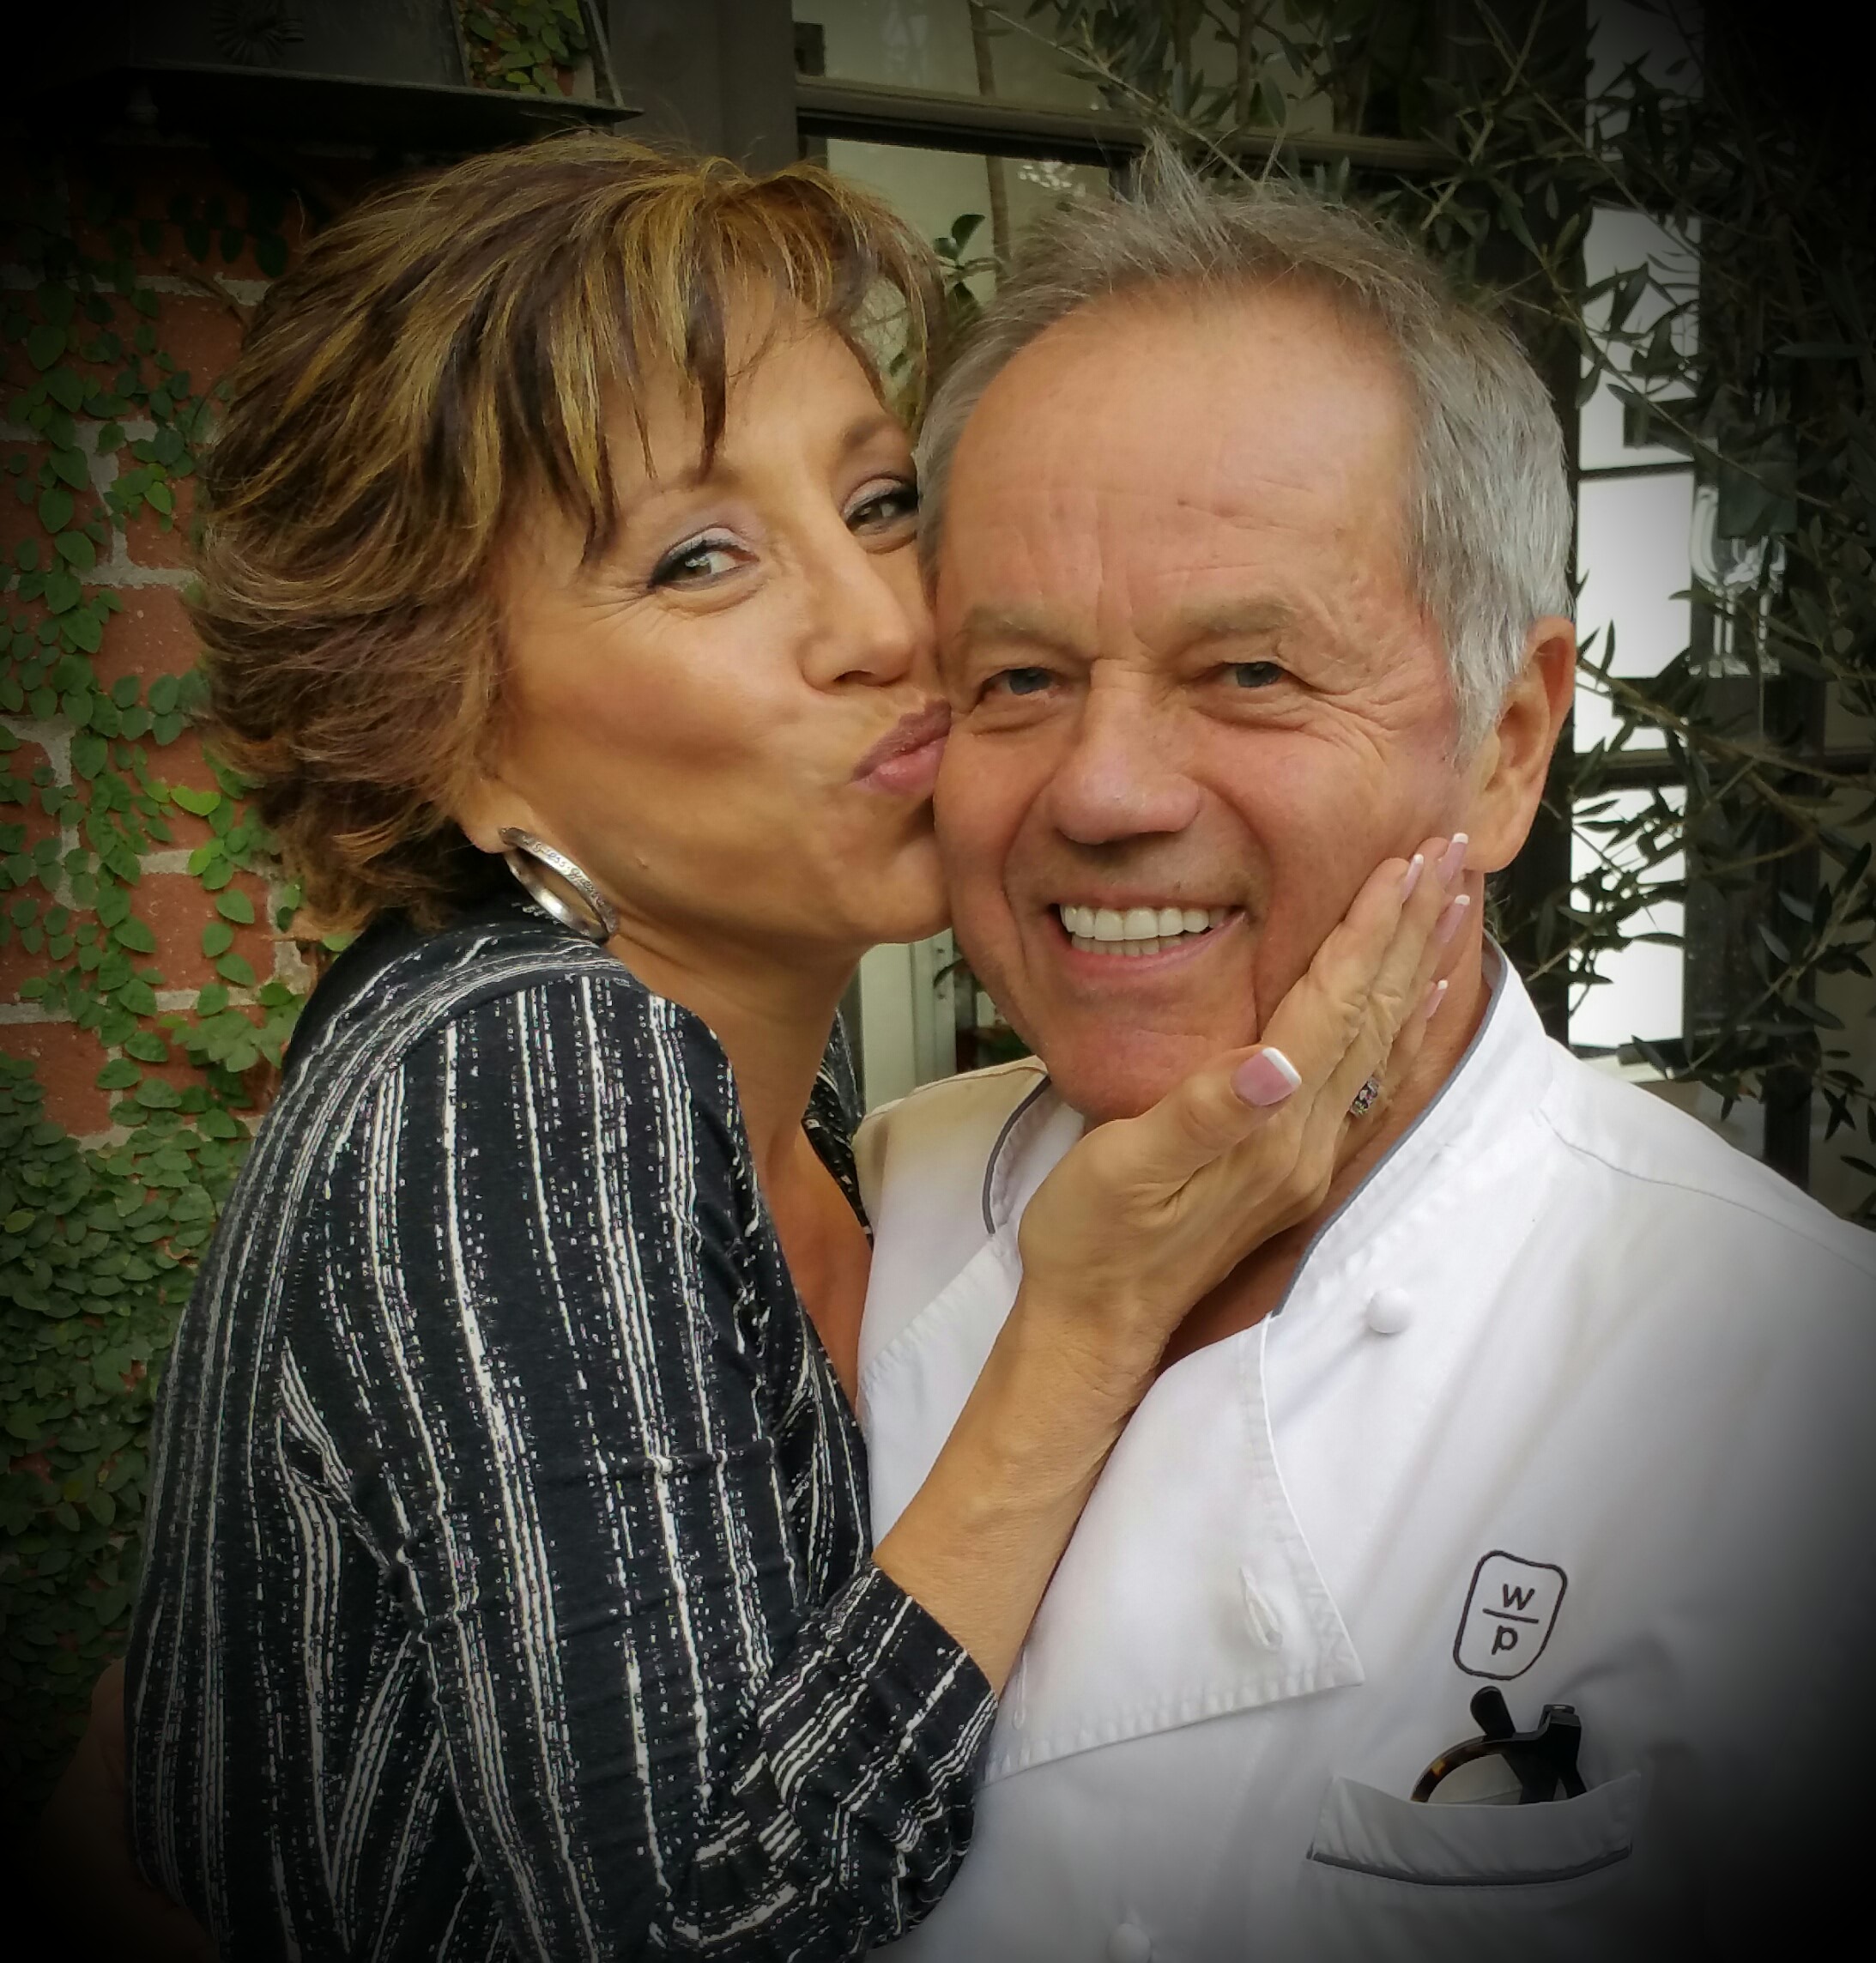 Spa's and HSN - Wolfgang Puck